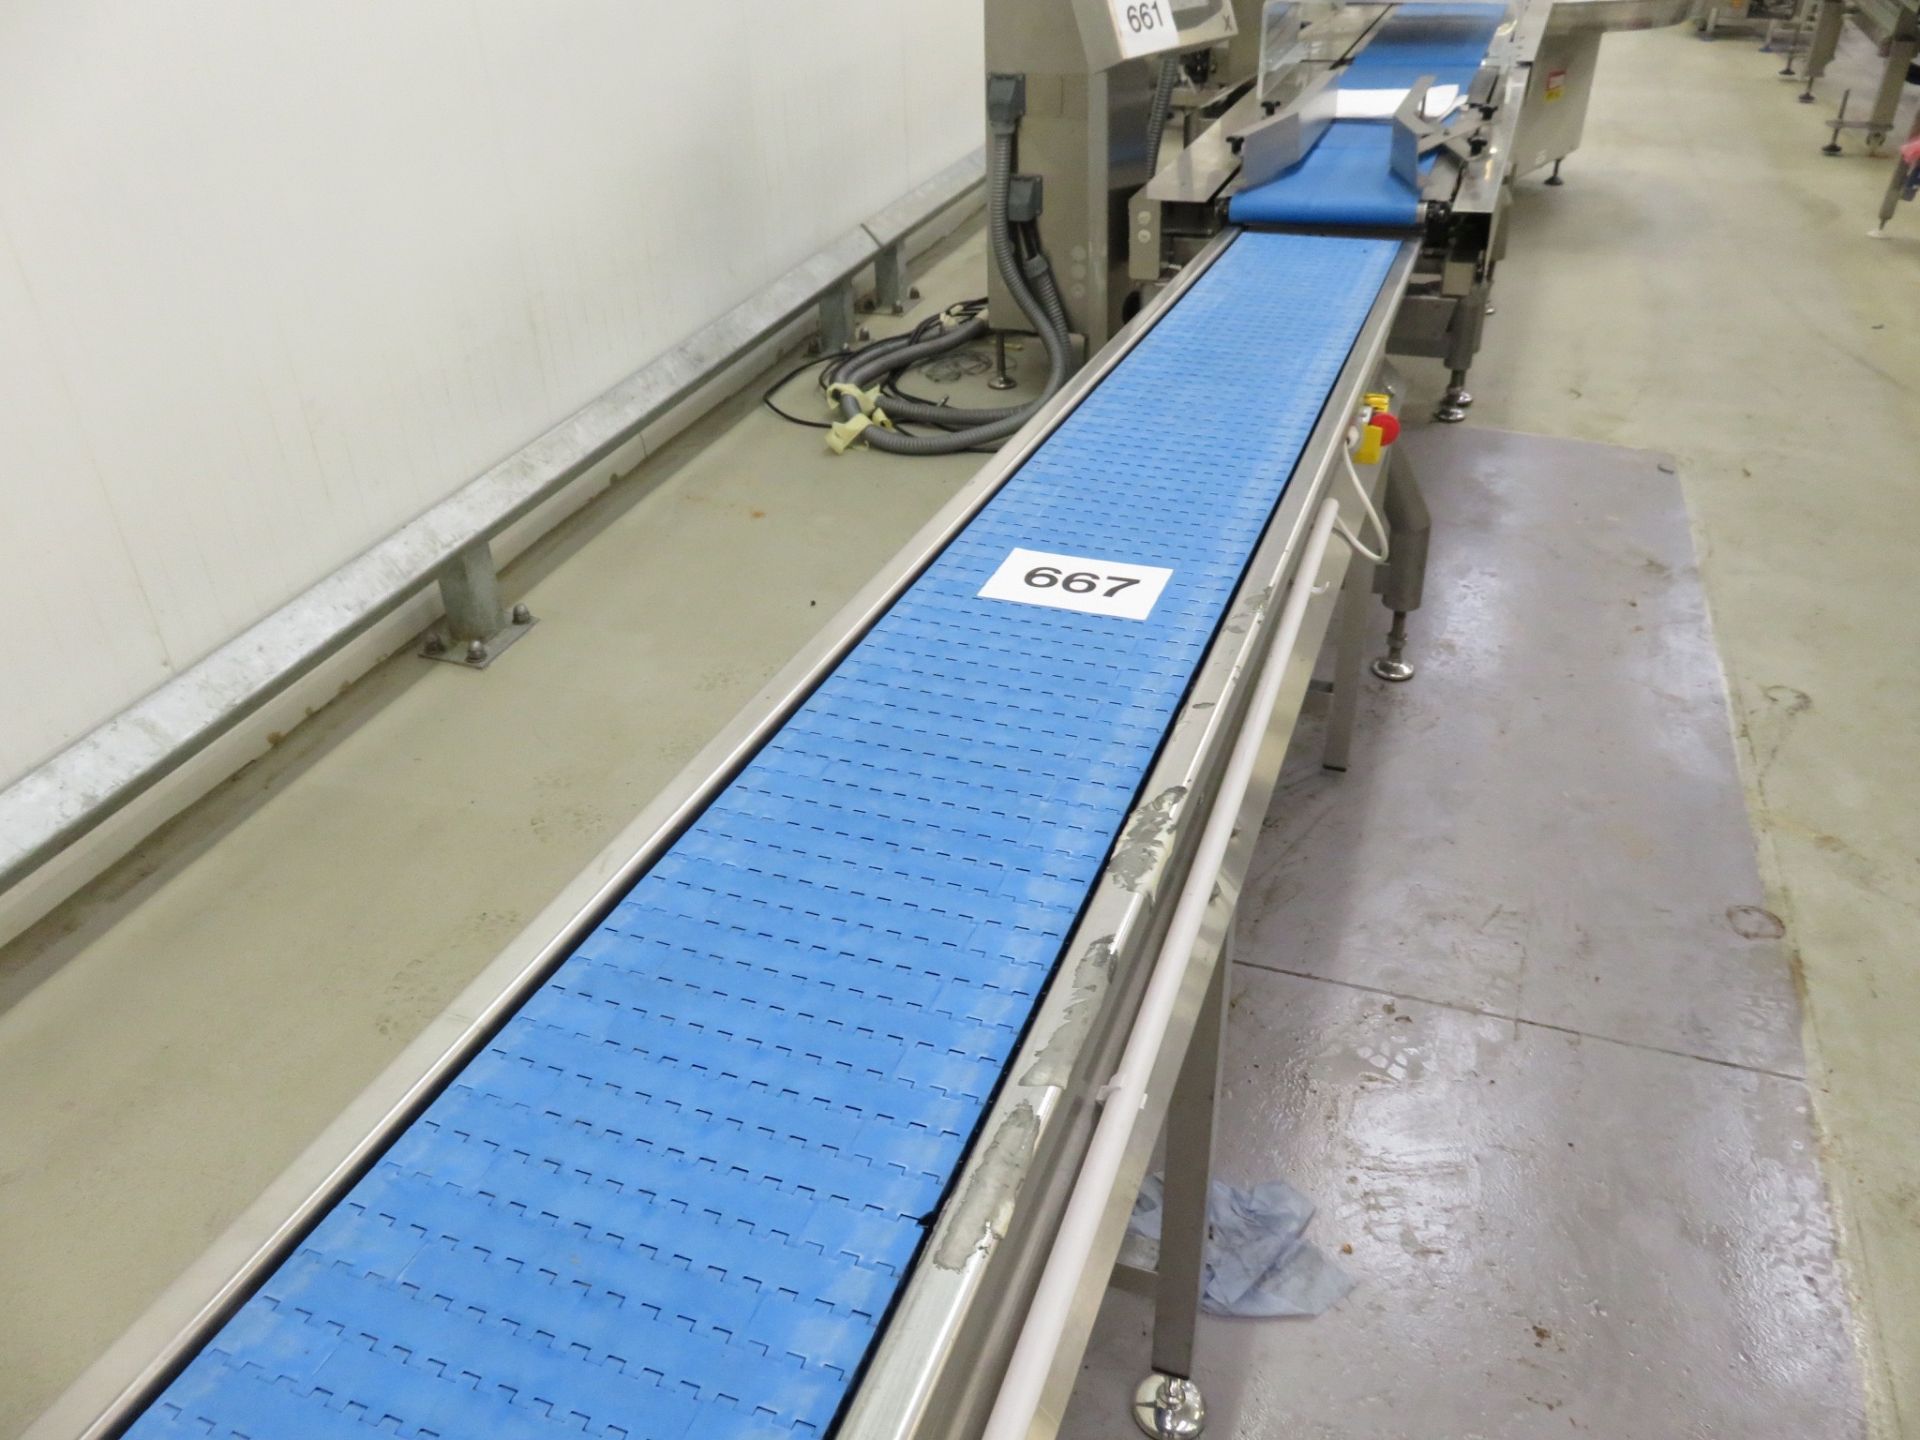 Conveyor 250mm wide blue introlox belt x 2.9 meters long. lift out charge £40